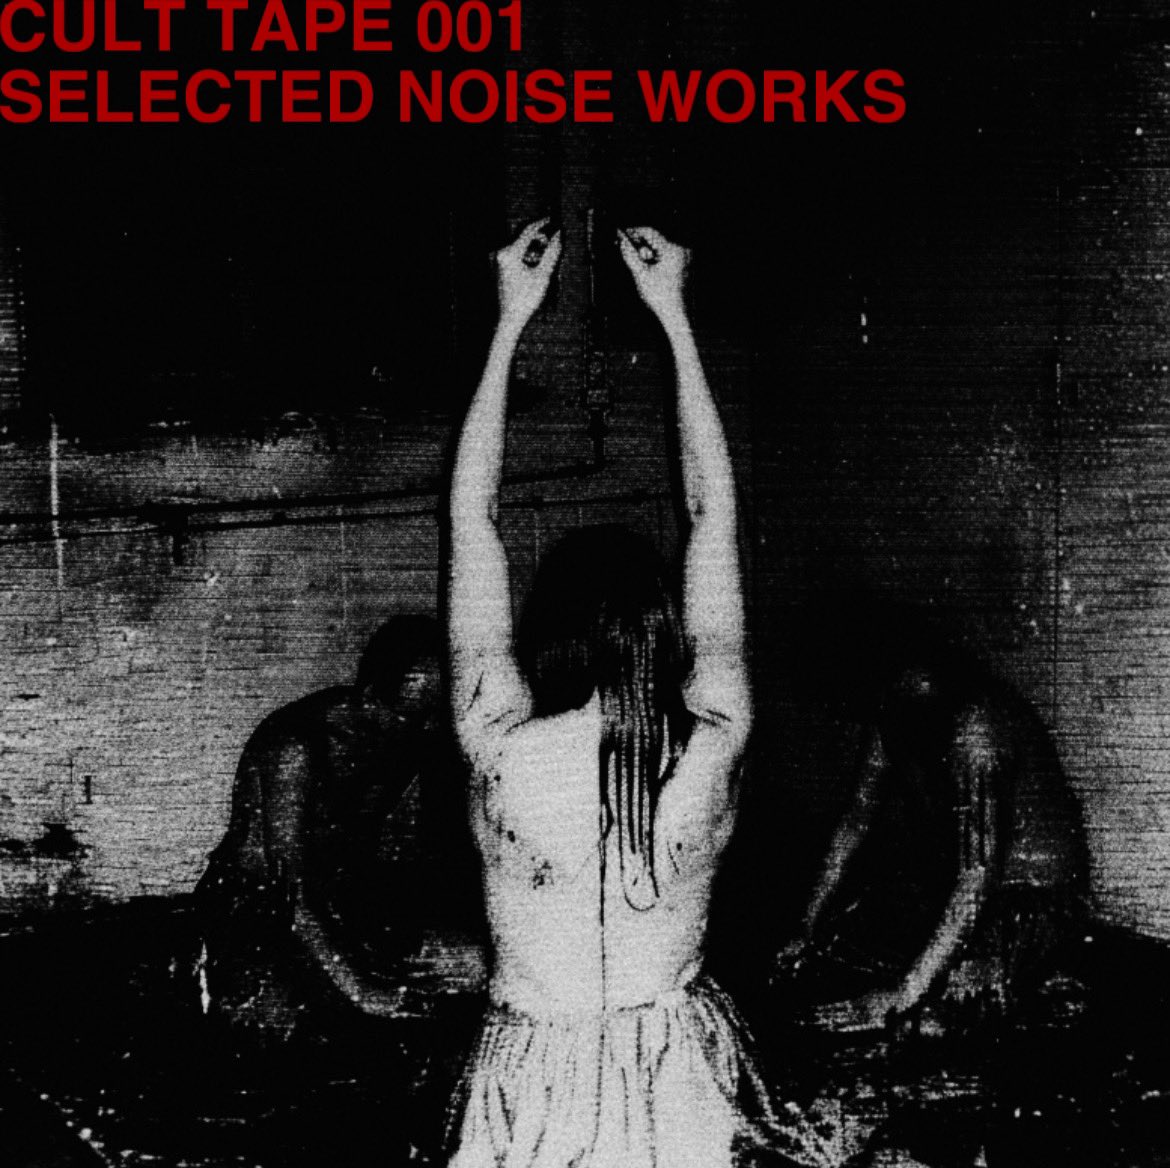 CULT TAPE 001 - SELECTED NOISE WORKS

43 SONG COMPILATION OF NOISE MUSIC FROM ME, FRIENDS, & FOLLOWERS

AVAILABLE FOR FREE ON BANDCAMP

kavarimusic.bandcamp.com